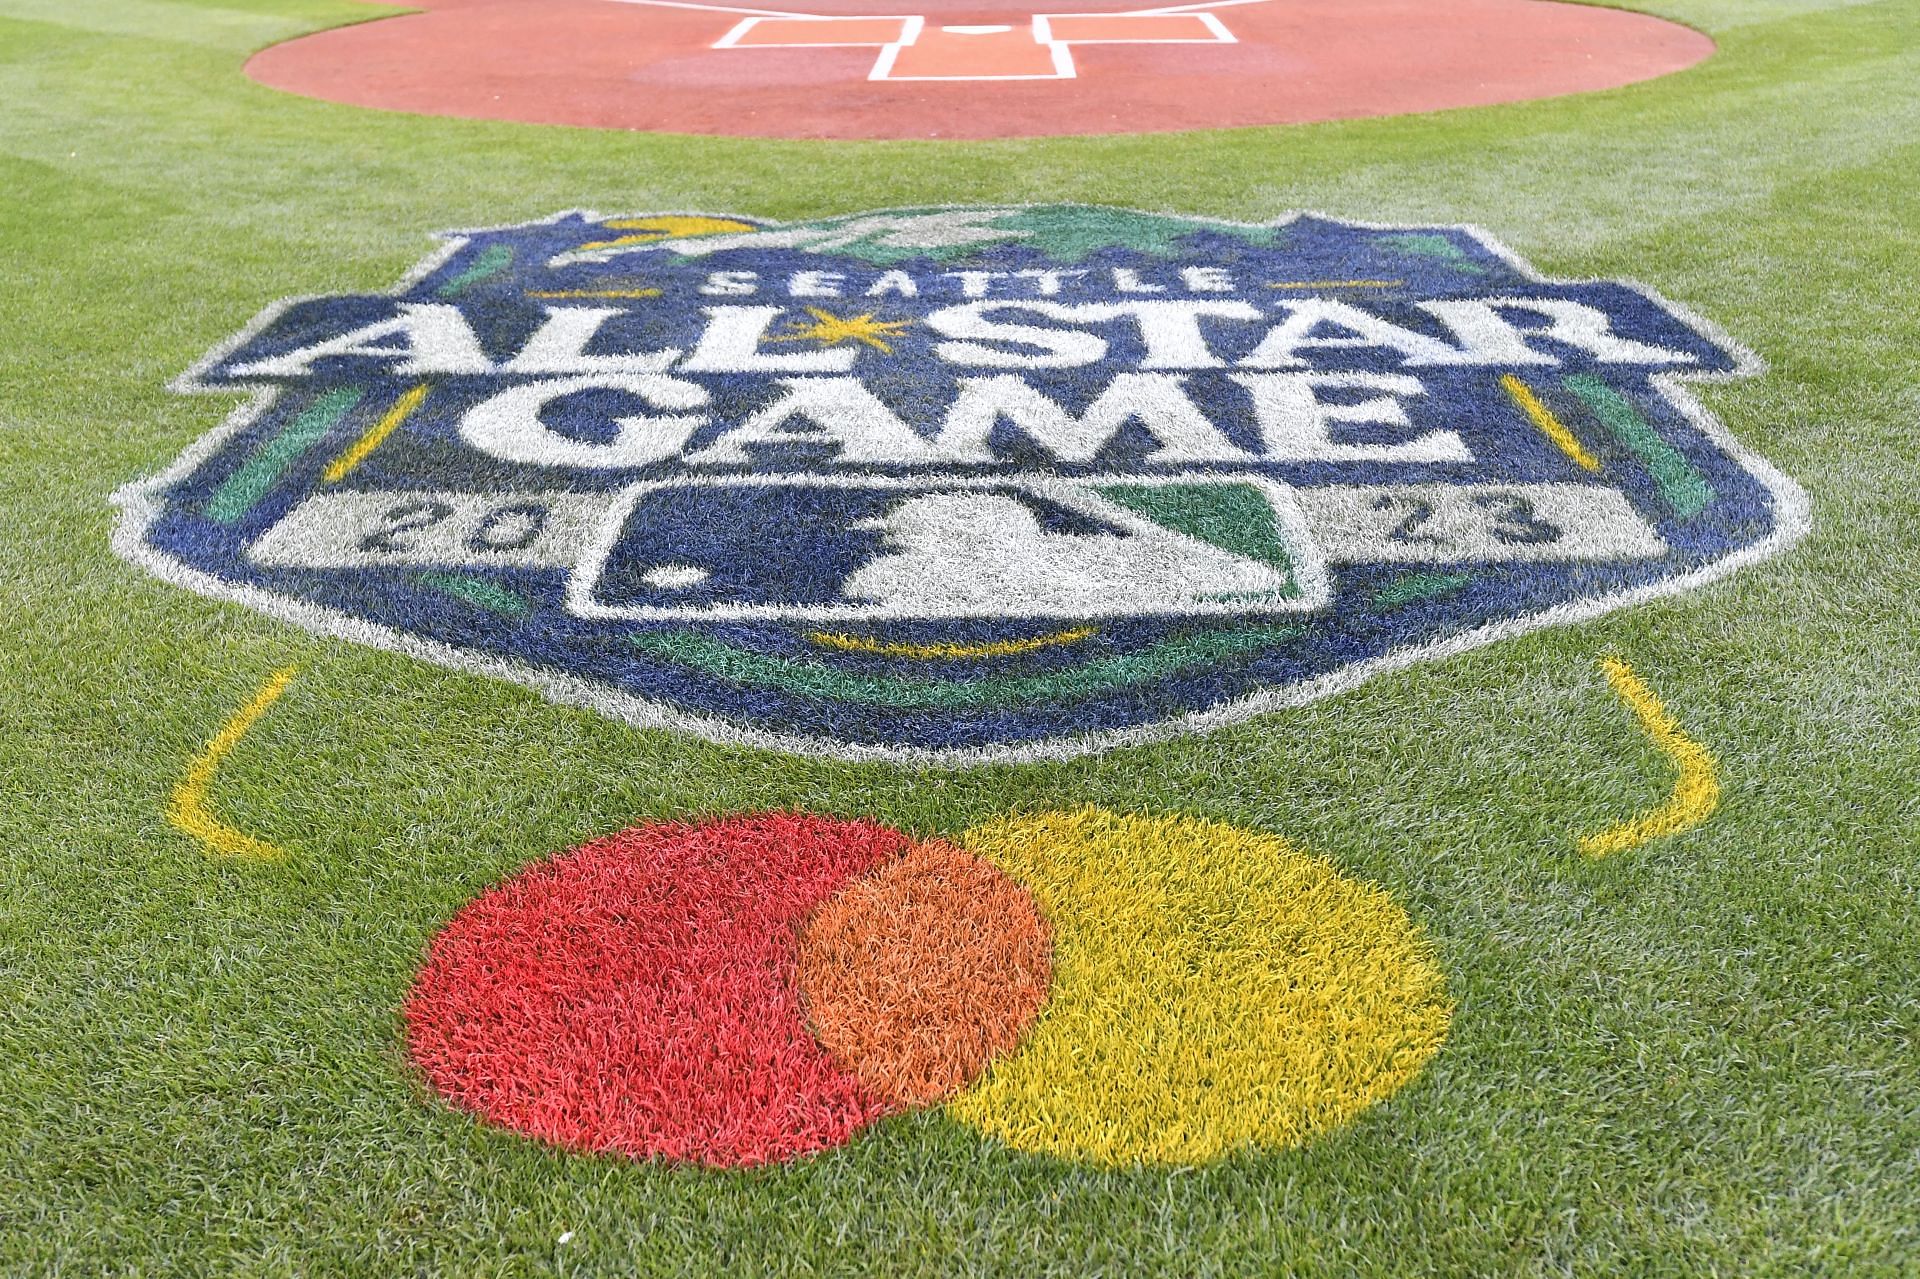 MLB All-Star Game 2023: What to know about the Mid-Summer Classic